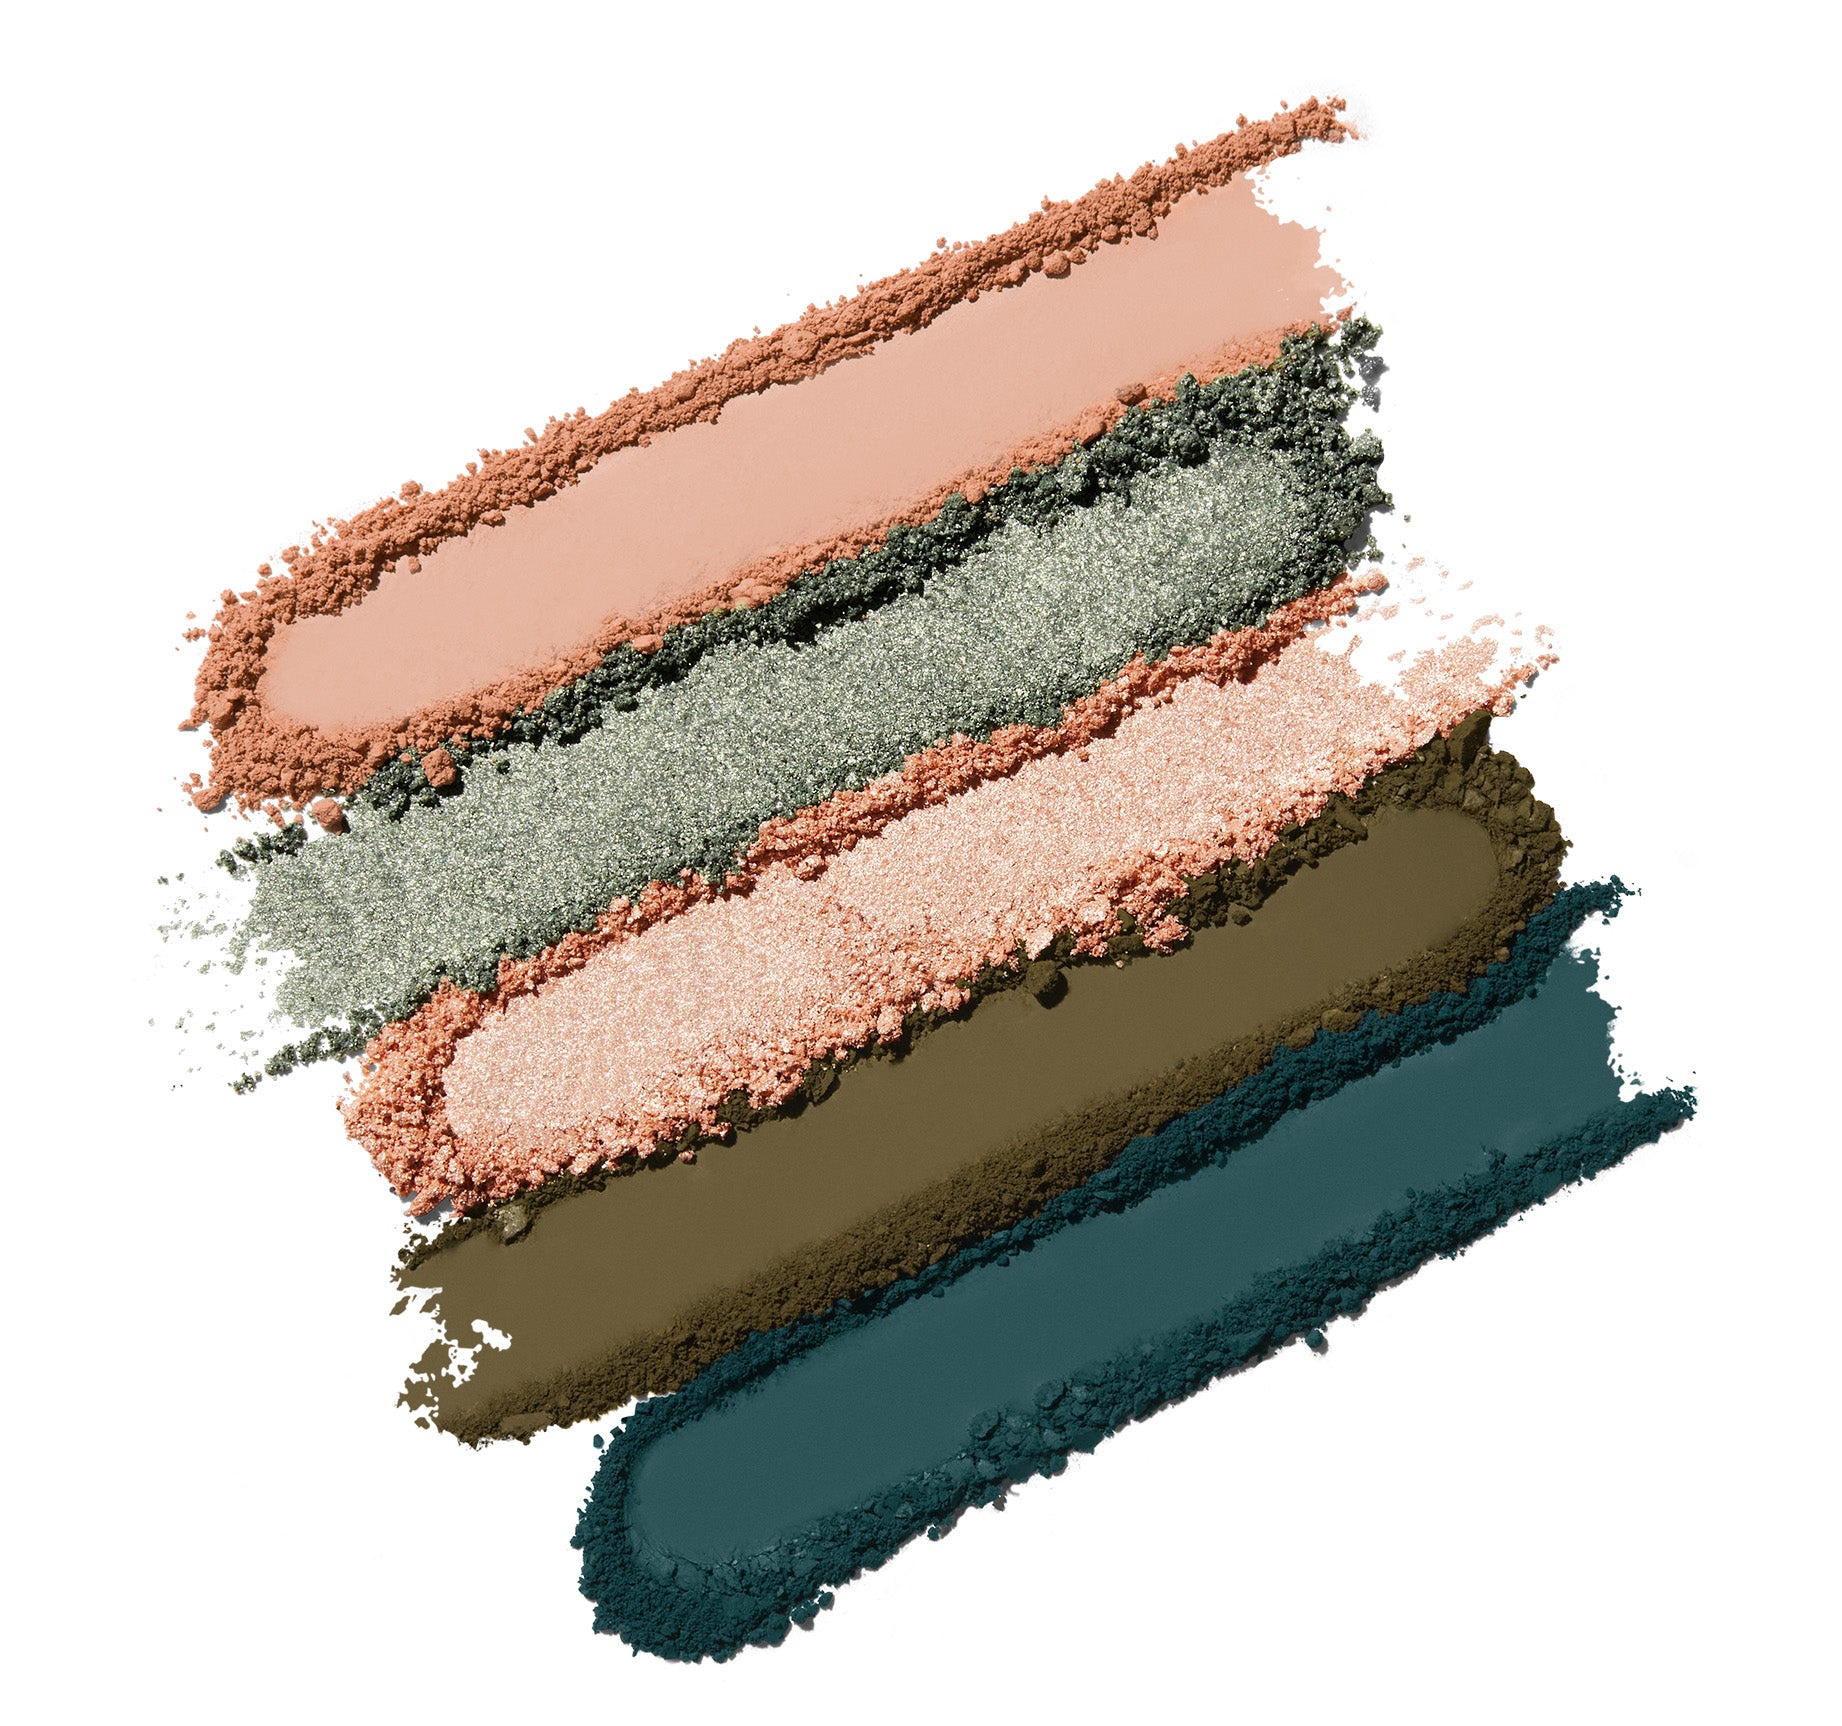 Ready In 5 Eyeshadow Palette - Welcome To Miami - Image 4